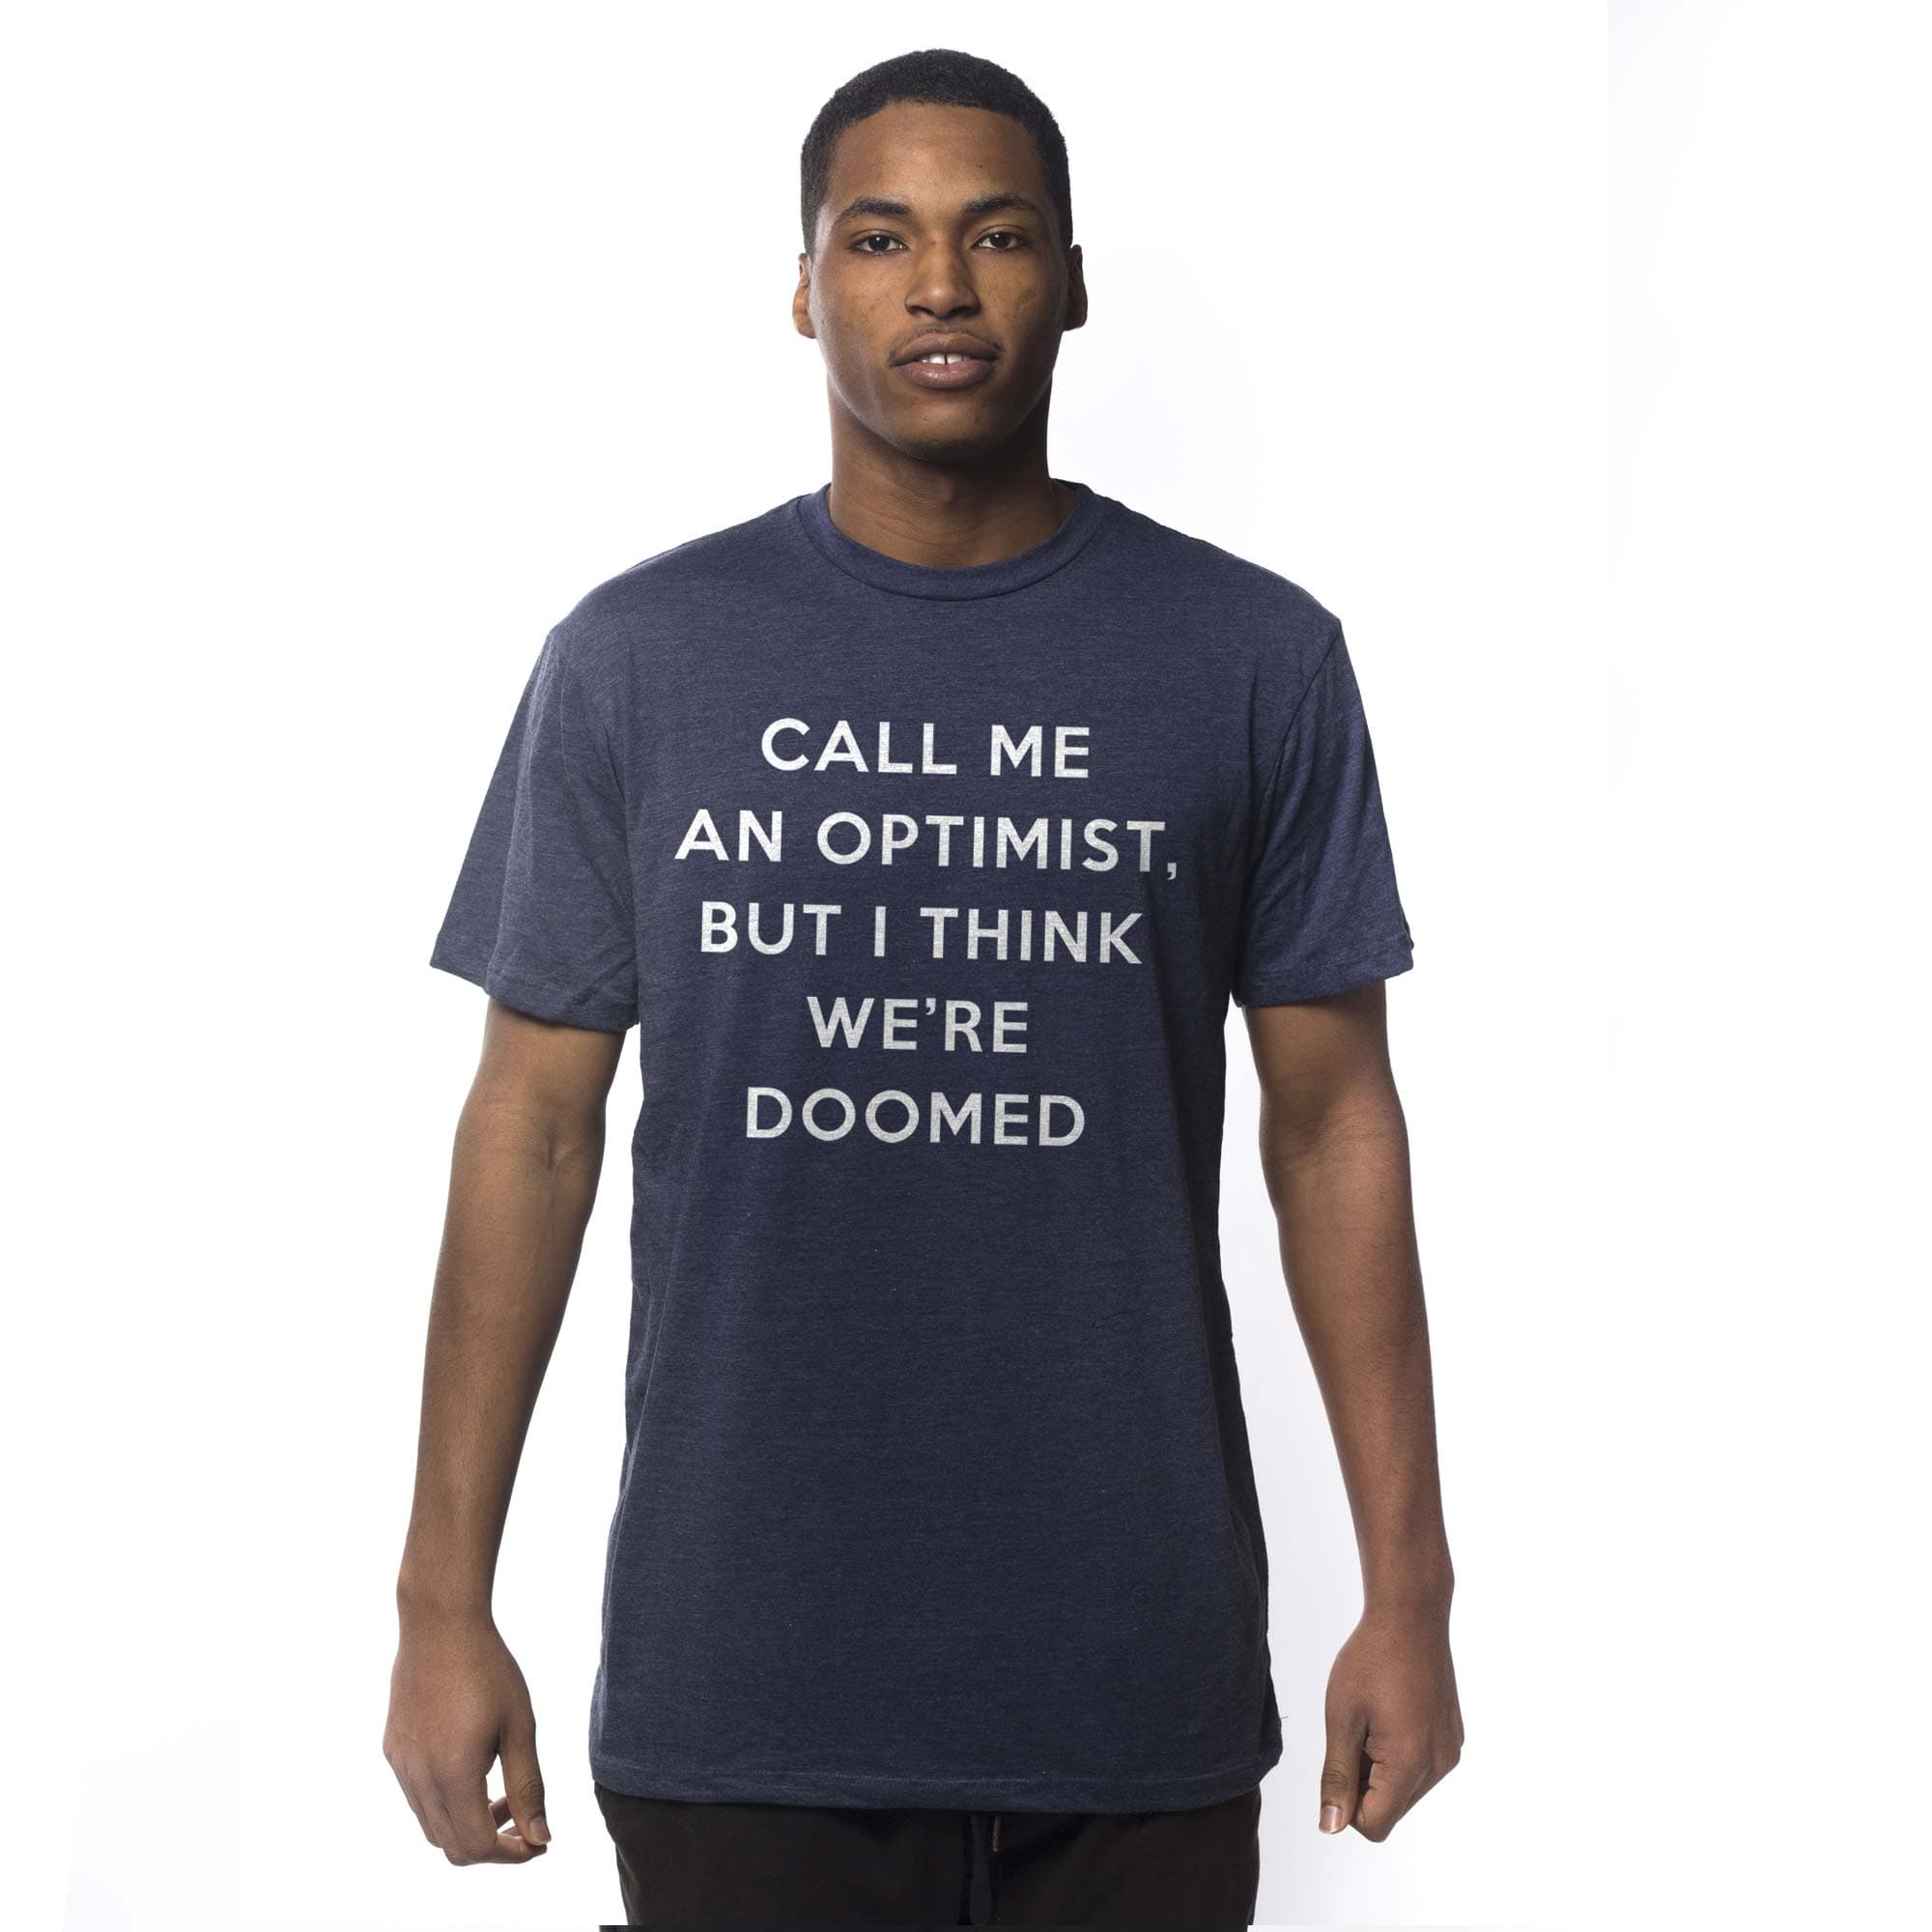 Men's Optimist But I Think We're Doomed Designer Graphic T-Shirt | Funny Ironic Tee | Solid Threads